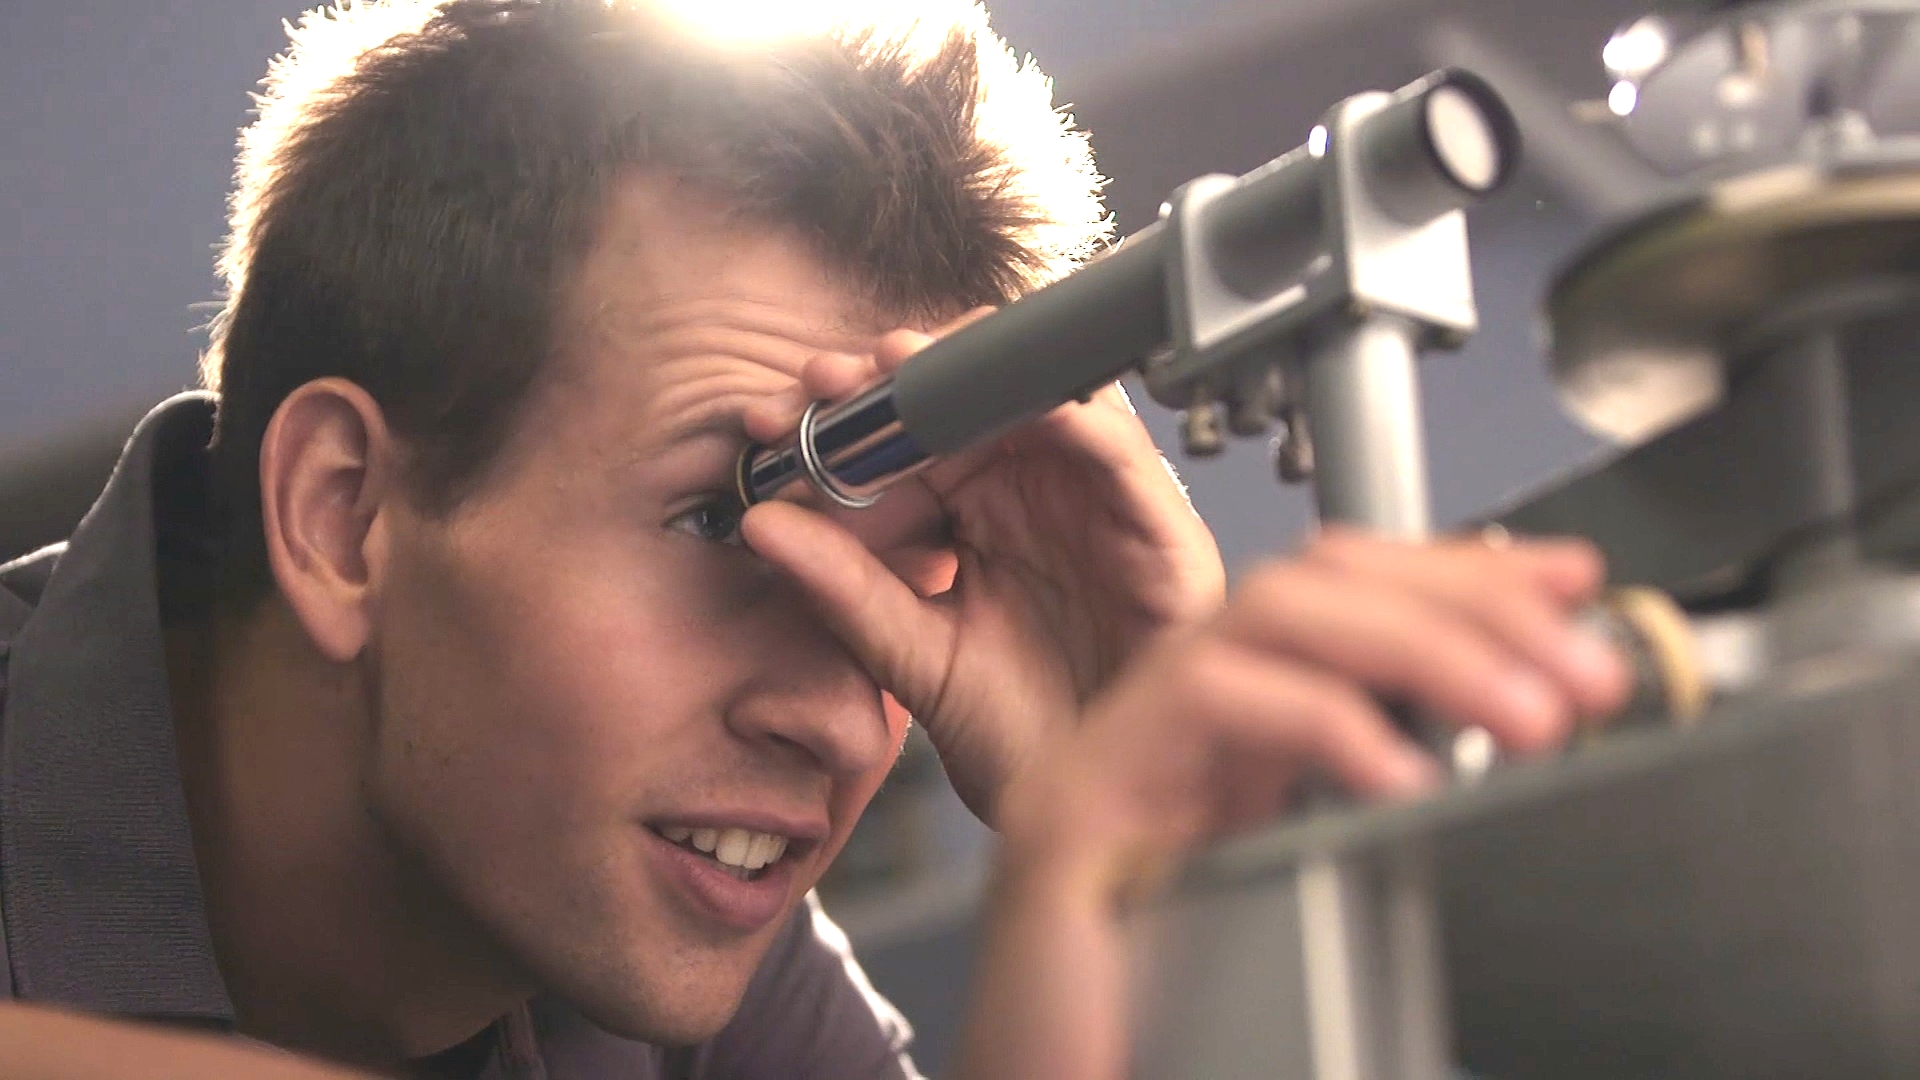 Male student looking through a long metal tube - physics equipment